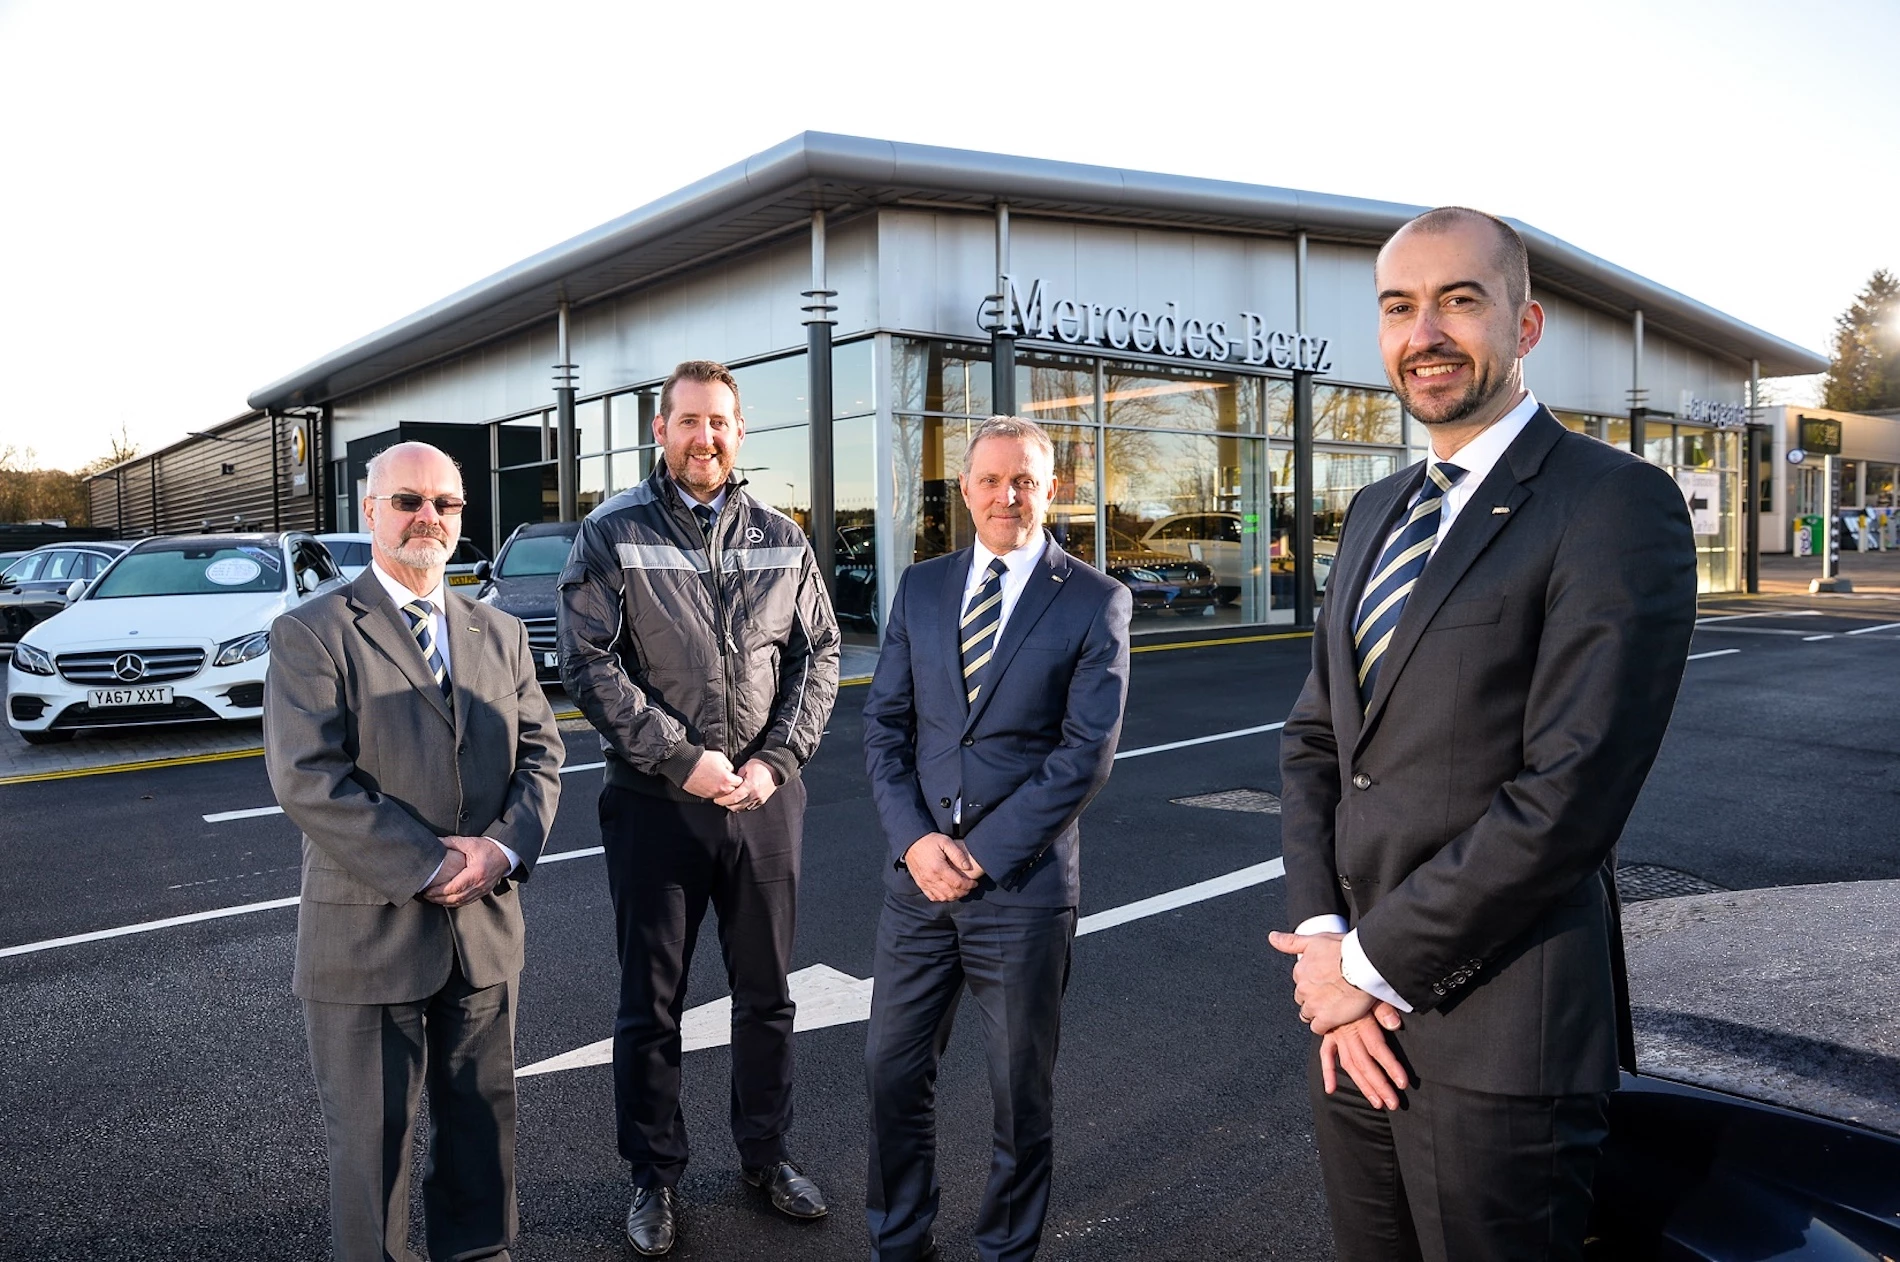  Jamie Taylor (far right), head of business at Mercedes-Benz Harrogate, with (L to R) John Blackwood, Richard Young and Geoff Roswell